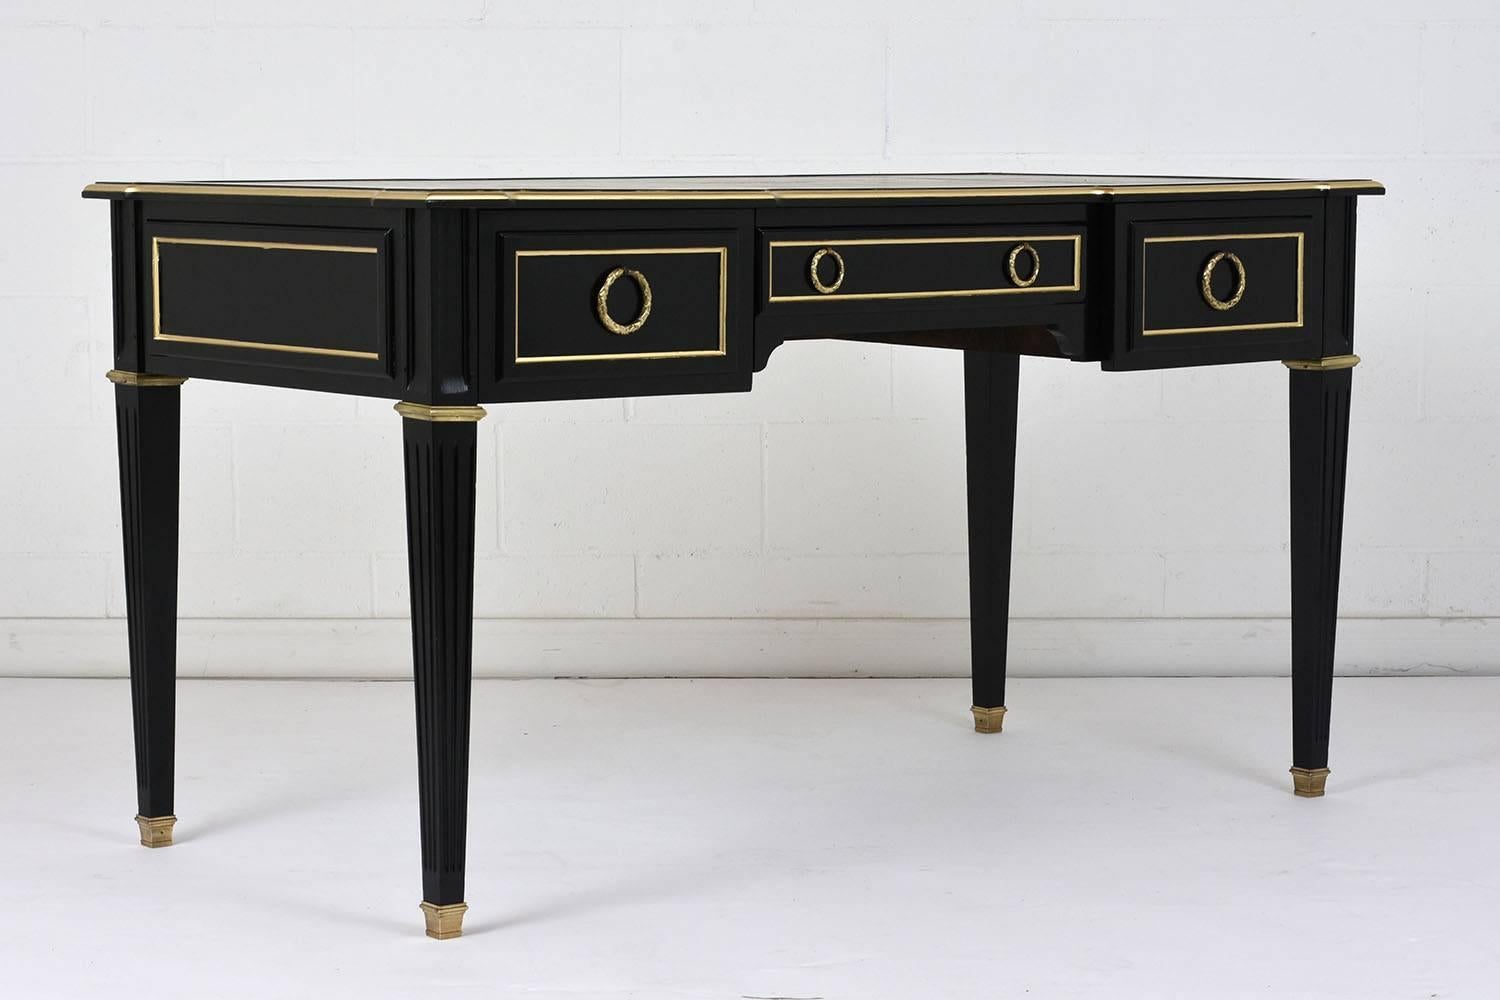 This 1900s antique French Louis XVI-style desk is made of mahogany wood with a deep ebonized and lacquered finish. The top features the original embossed leather insert with gilt details of acanthus leaves and scrolls. There are three drawers with